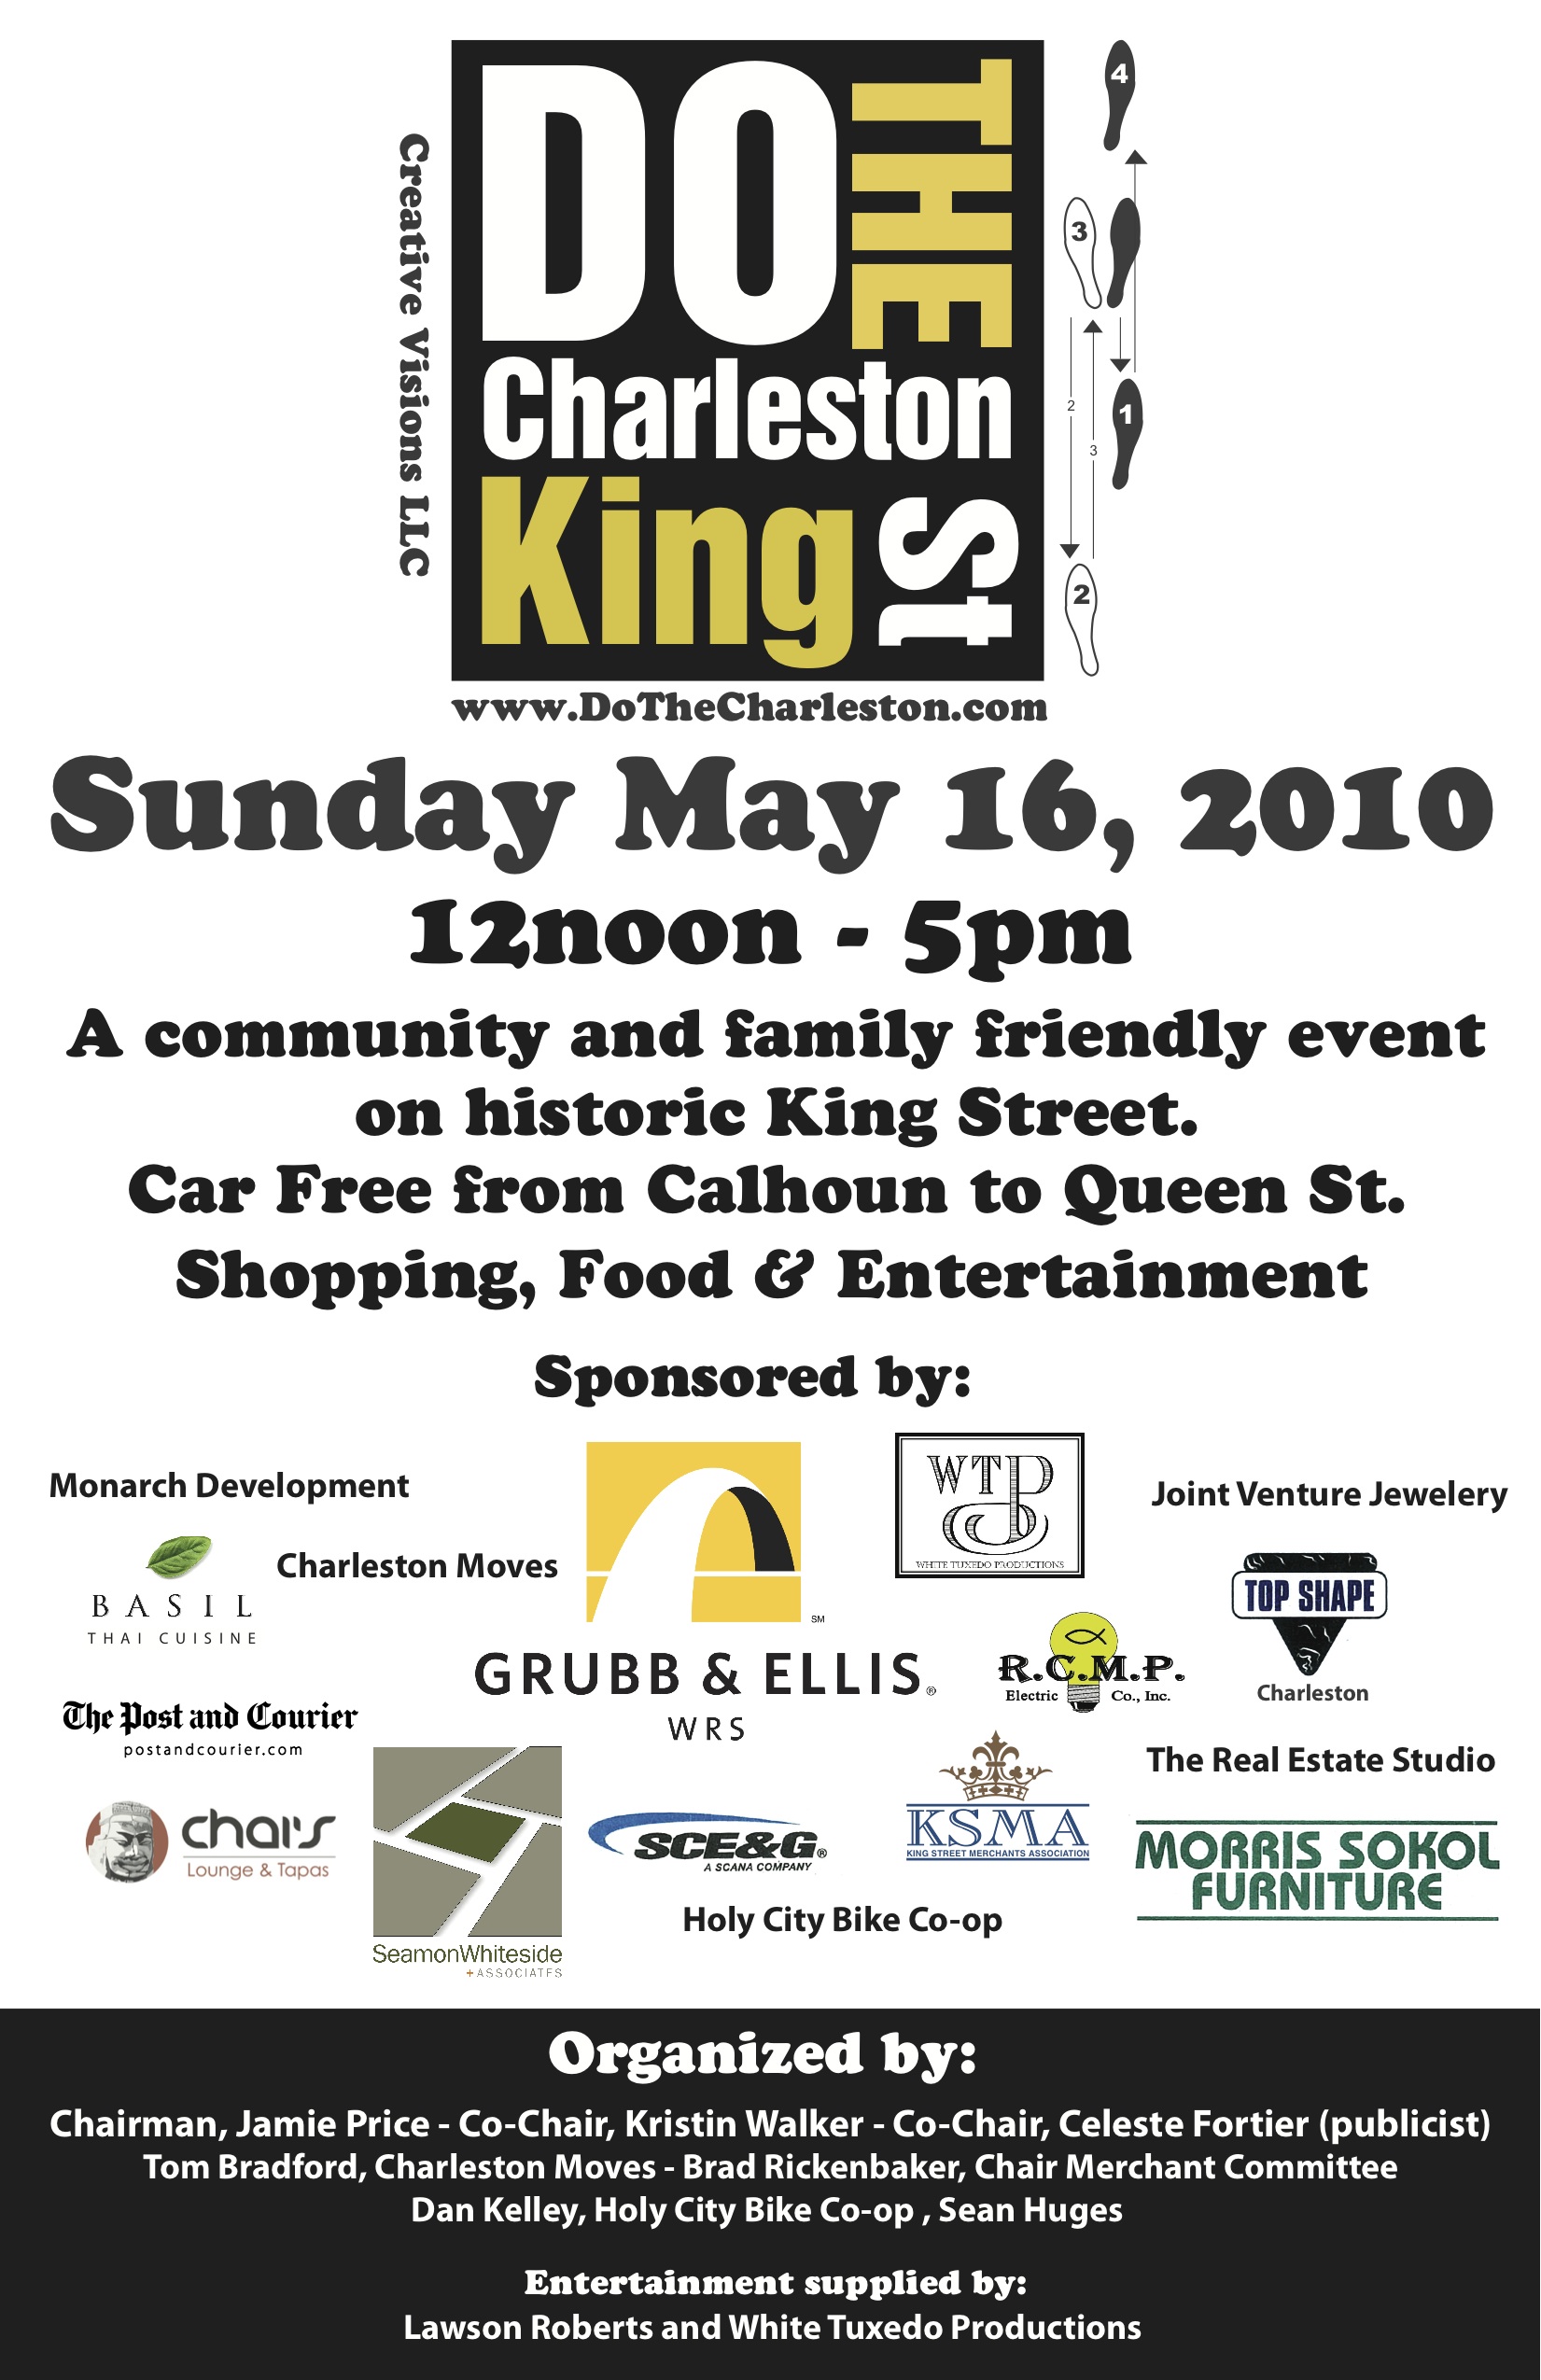 Fun Event on King St – Sunday May 16th from 12-5